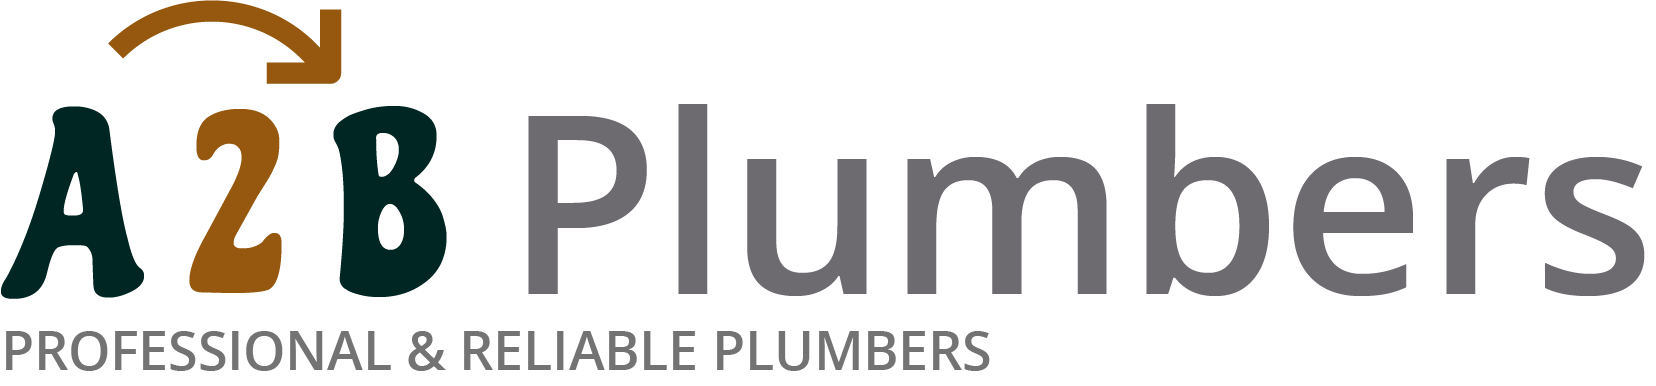 If you need a boiler installed, a radiator repaired or a leaking tap fixed, call us now - we provide services for properties in Newburn and the local area.